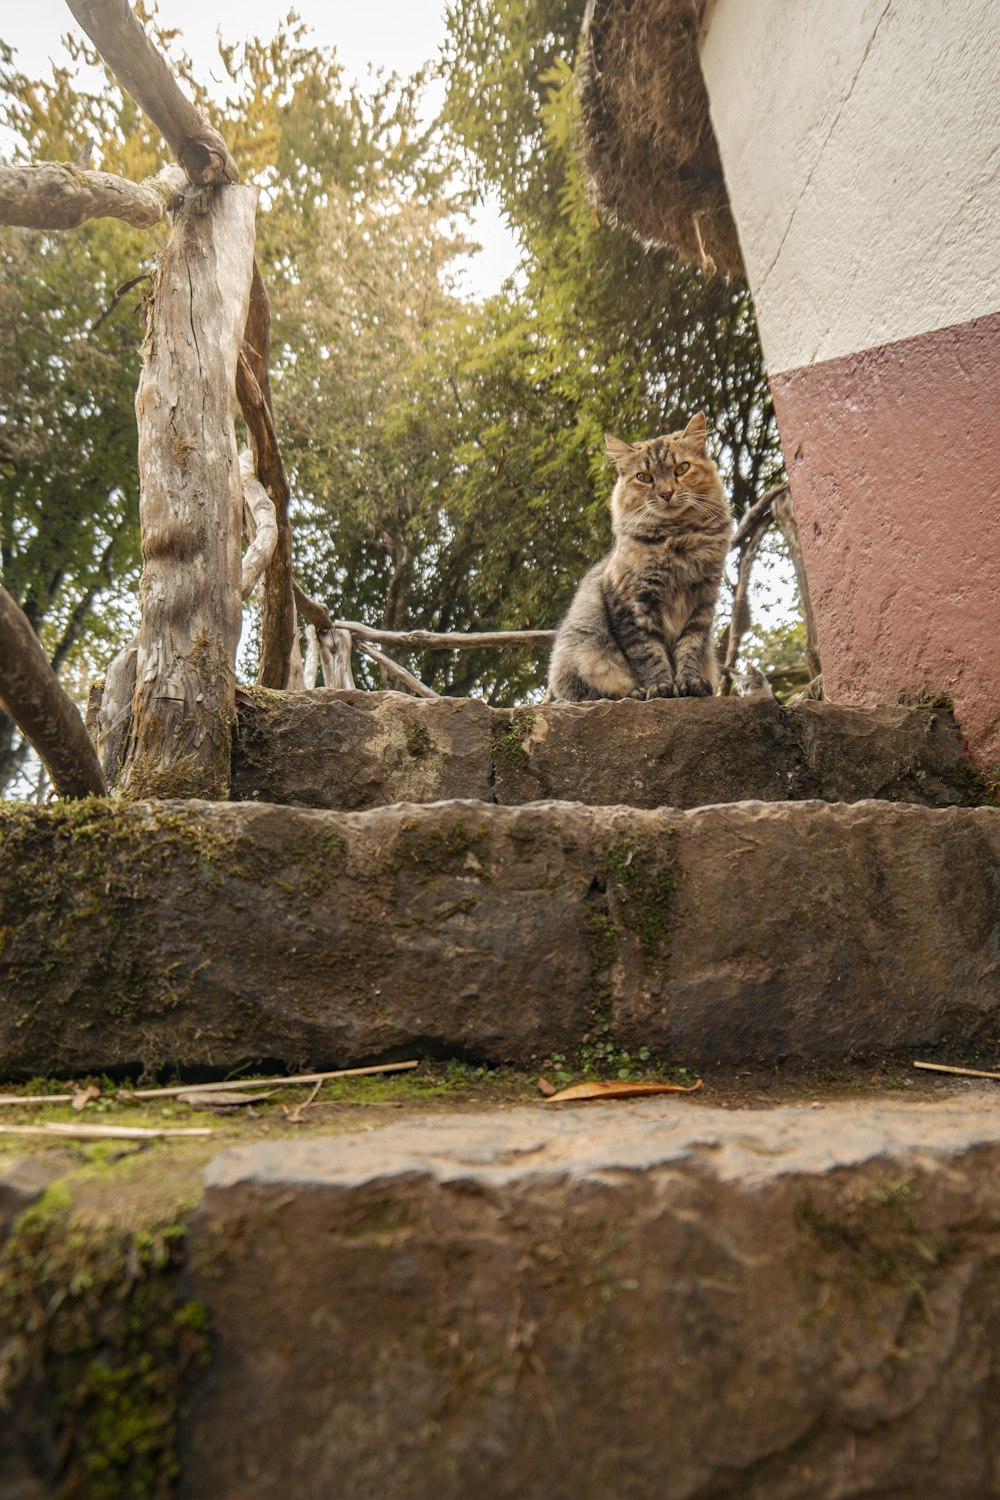 a cat sitting on the steps of a house